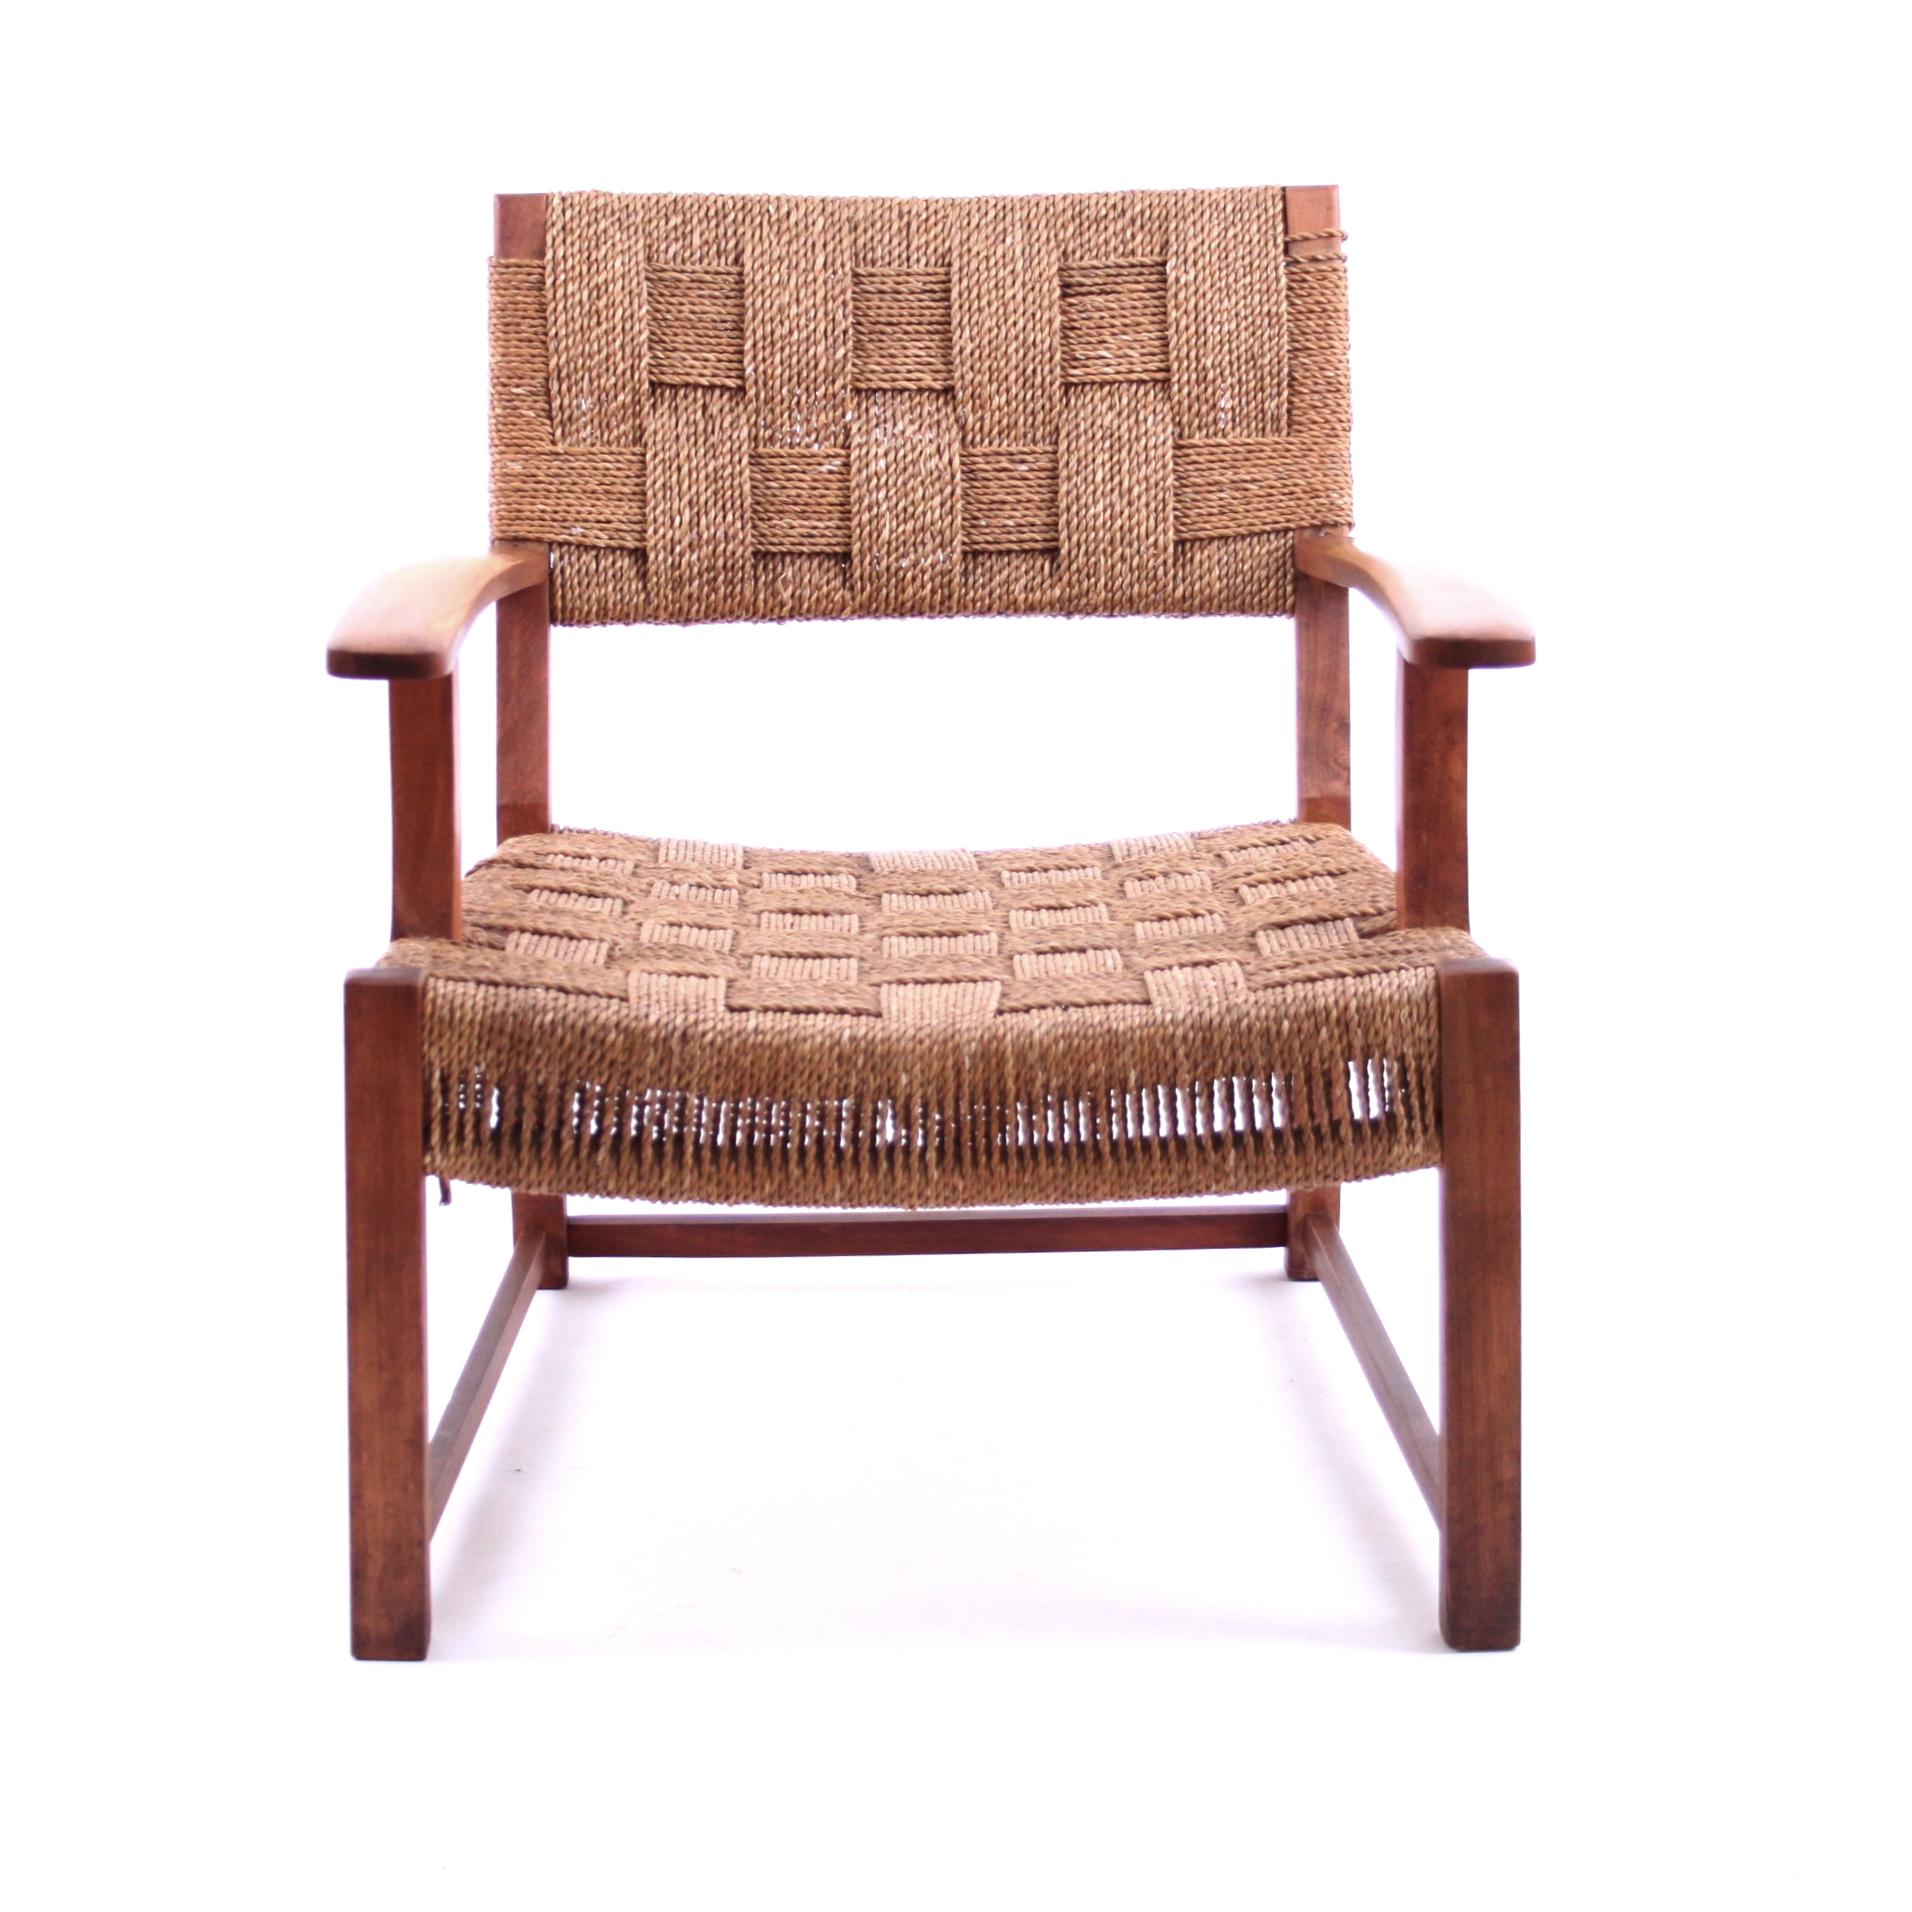 FRITS SCHLEGEL ATTRIBUTED  -  SCANDINAVIAN MODERN  - DENMARK 1940s

A lounge armchair in stained beech and original seagrass.

Design attributed to Danish architect and designer Frits Schlegel 1896–1965. Production 1941.

Beautiful vintage